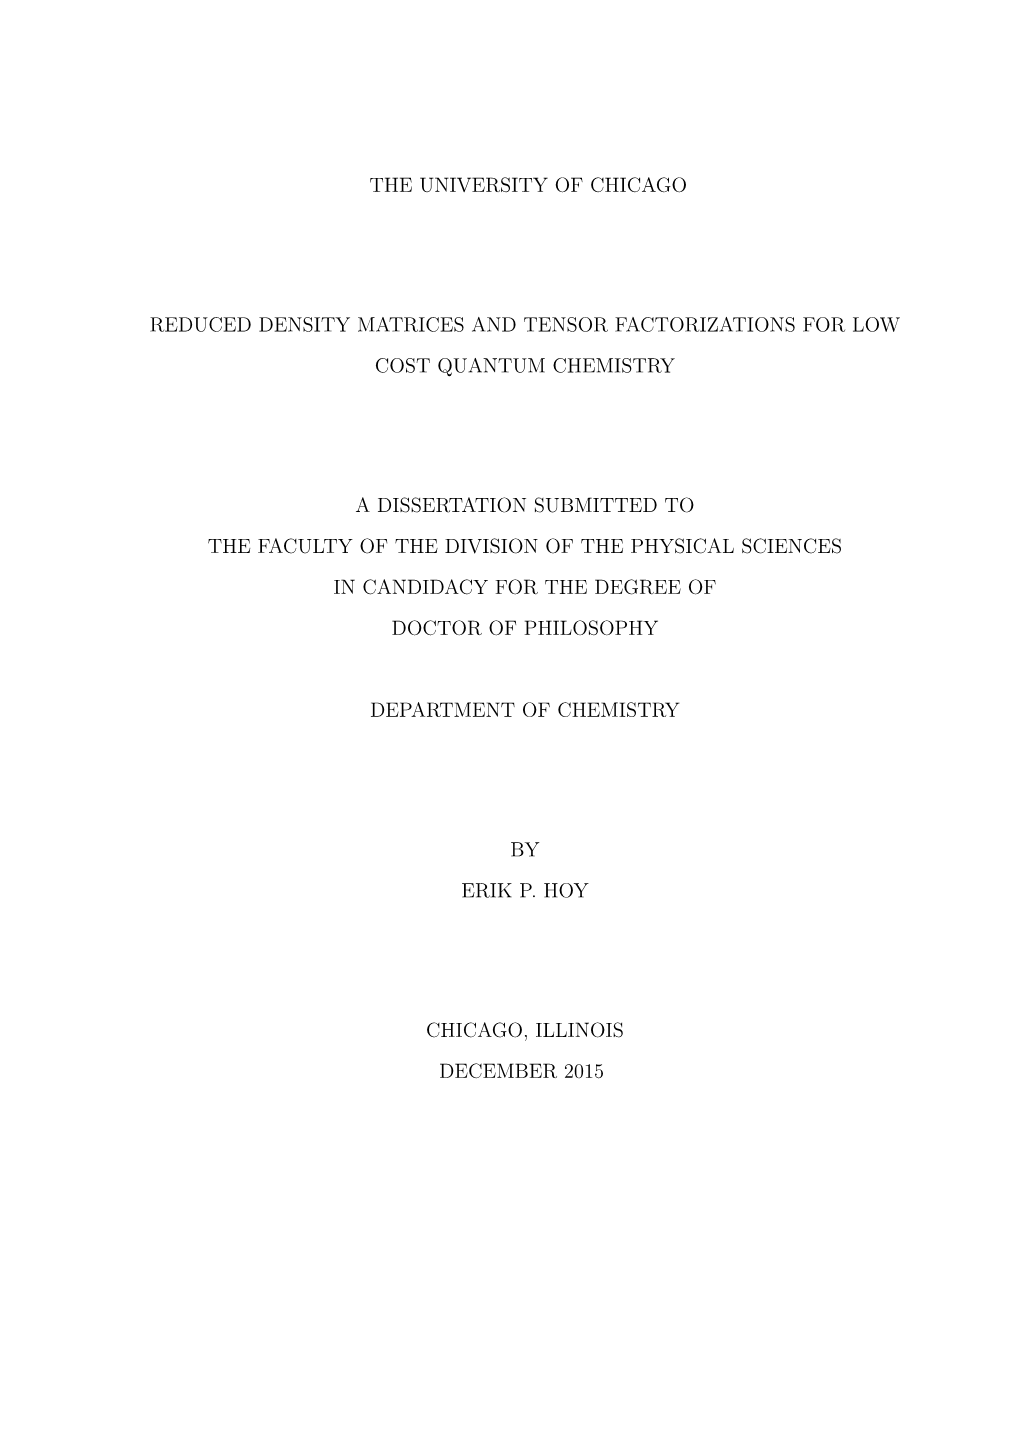 The University of Chicago Reduced Density Matrices and Tensor Factorizations for Low Cost Quantum Chemistry a Dissertation Submi